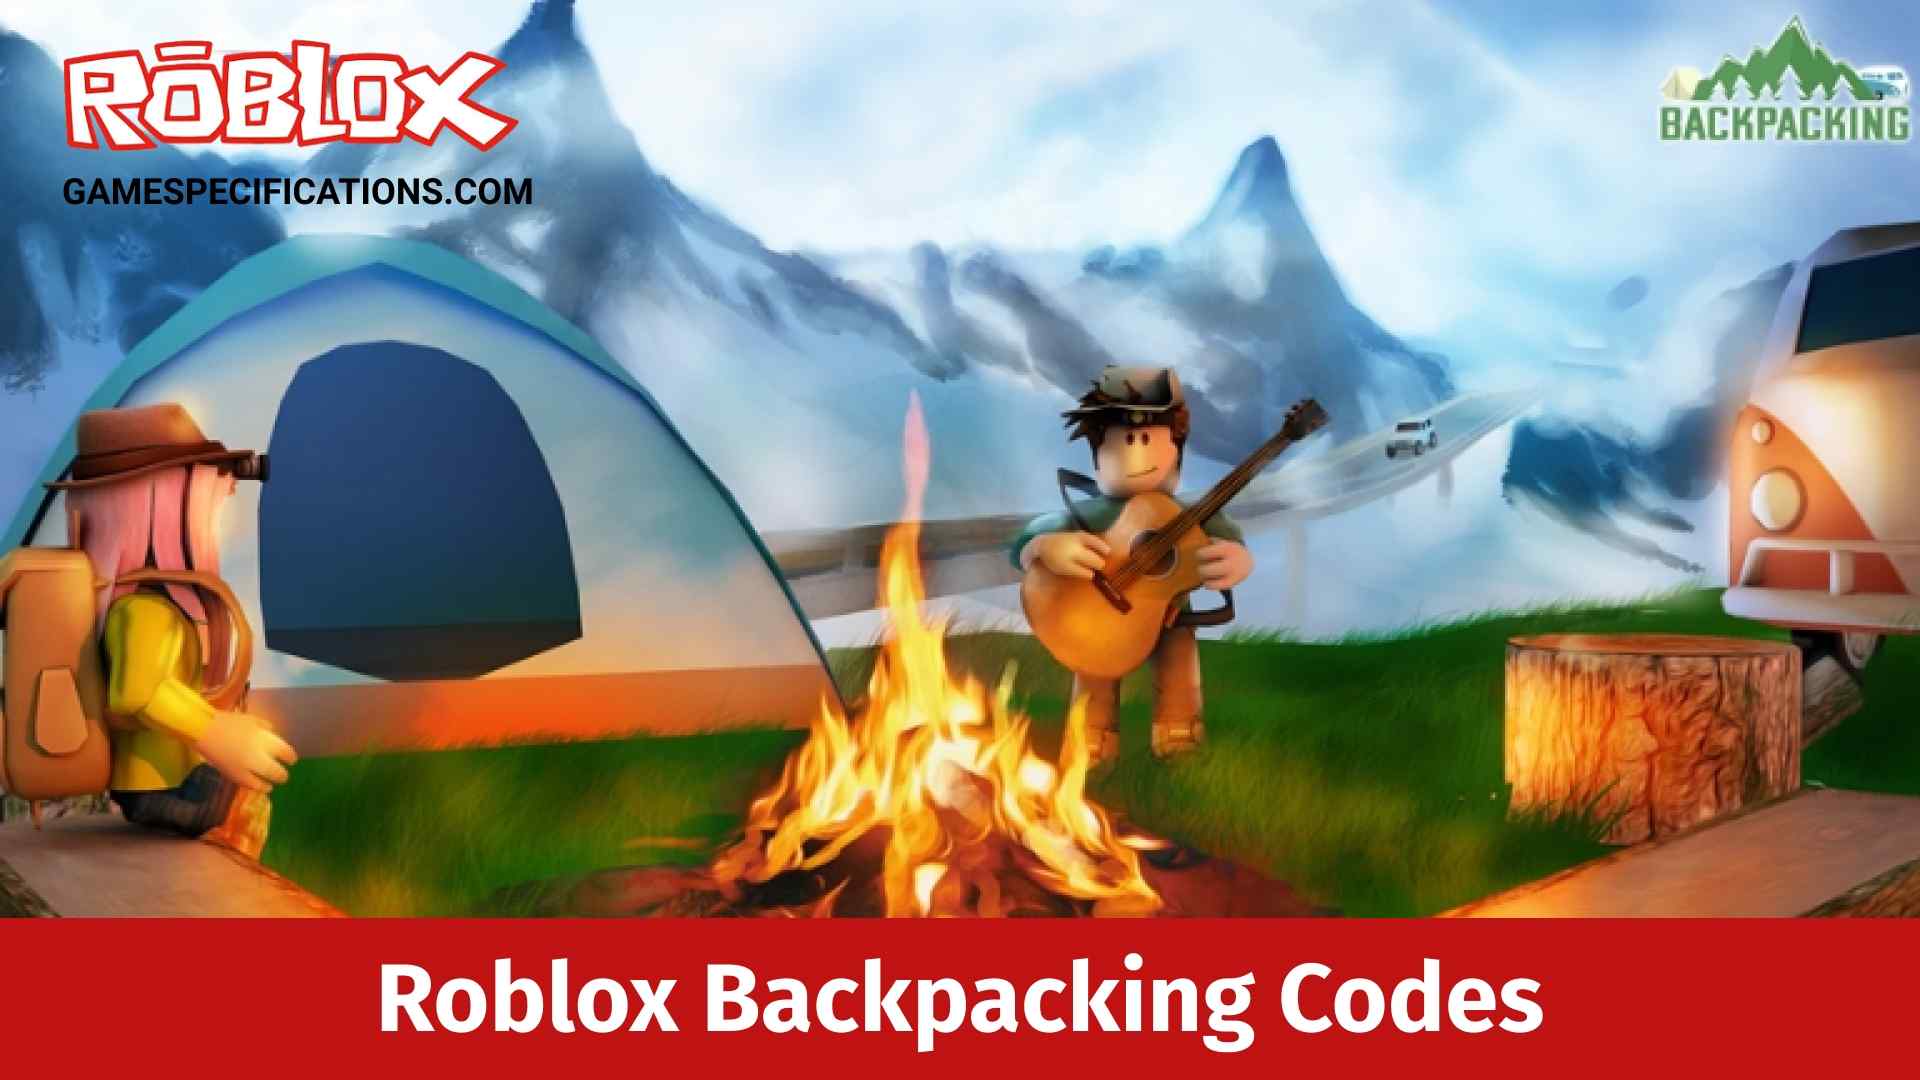 Roblox Backpacking Codes July 2021 Game Specifications - bonfire roblox id